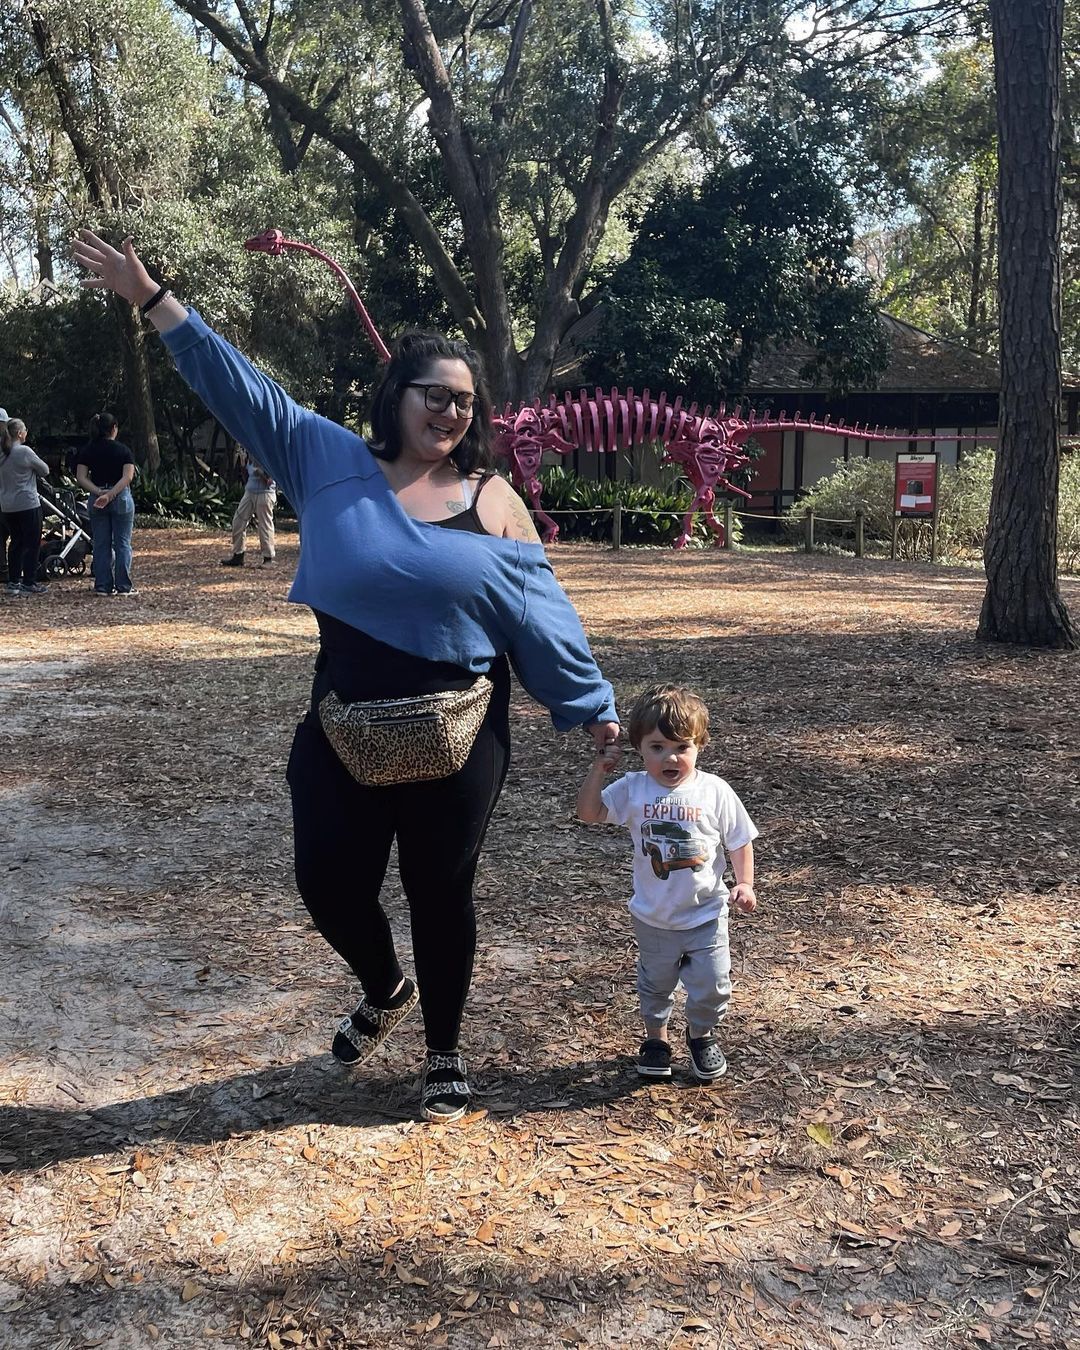 Family time is best spent at the Tallahassee Museum! 🥰 📸: @terrijojo_#TallahasseeMuseum #Tallahassee #iHeartTally #TheArtsLiveHere #ExploreFlorida #LoveFL #Museum #FamilyVacation